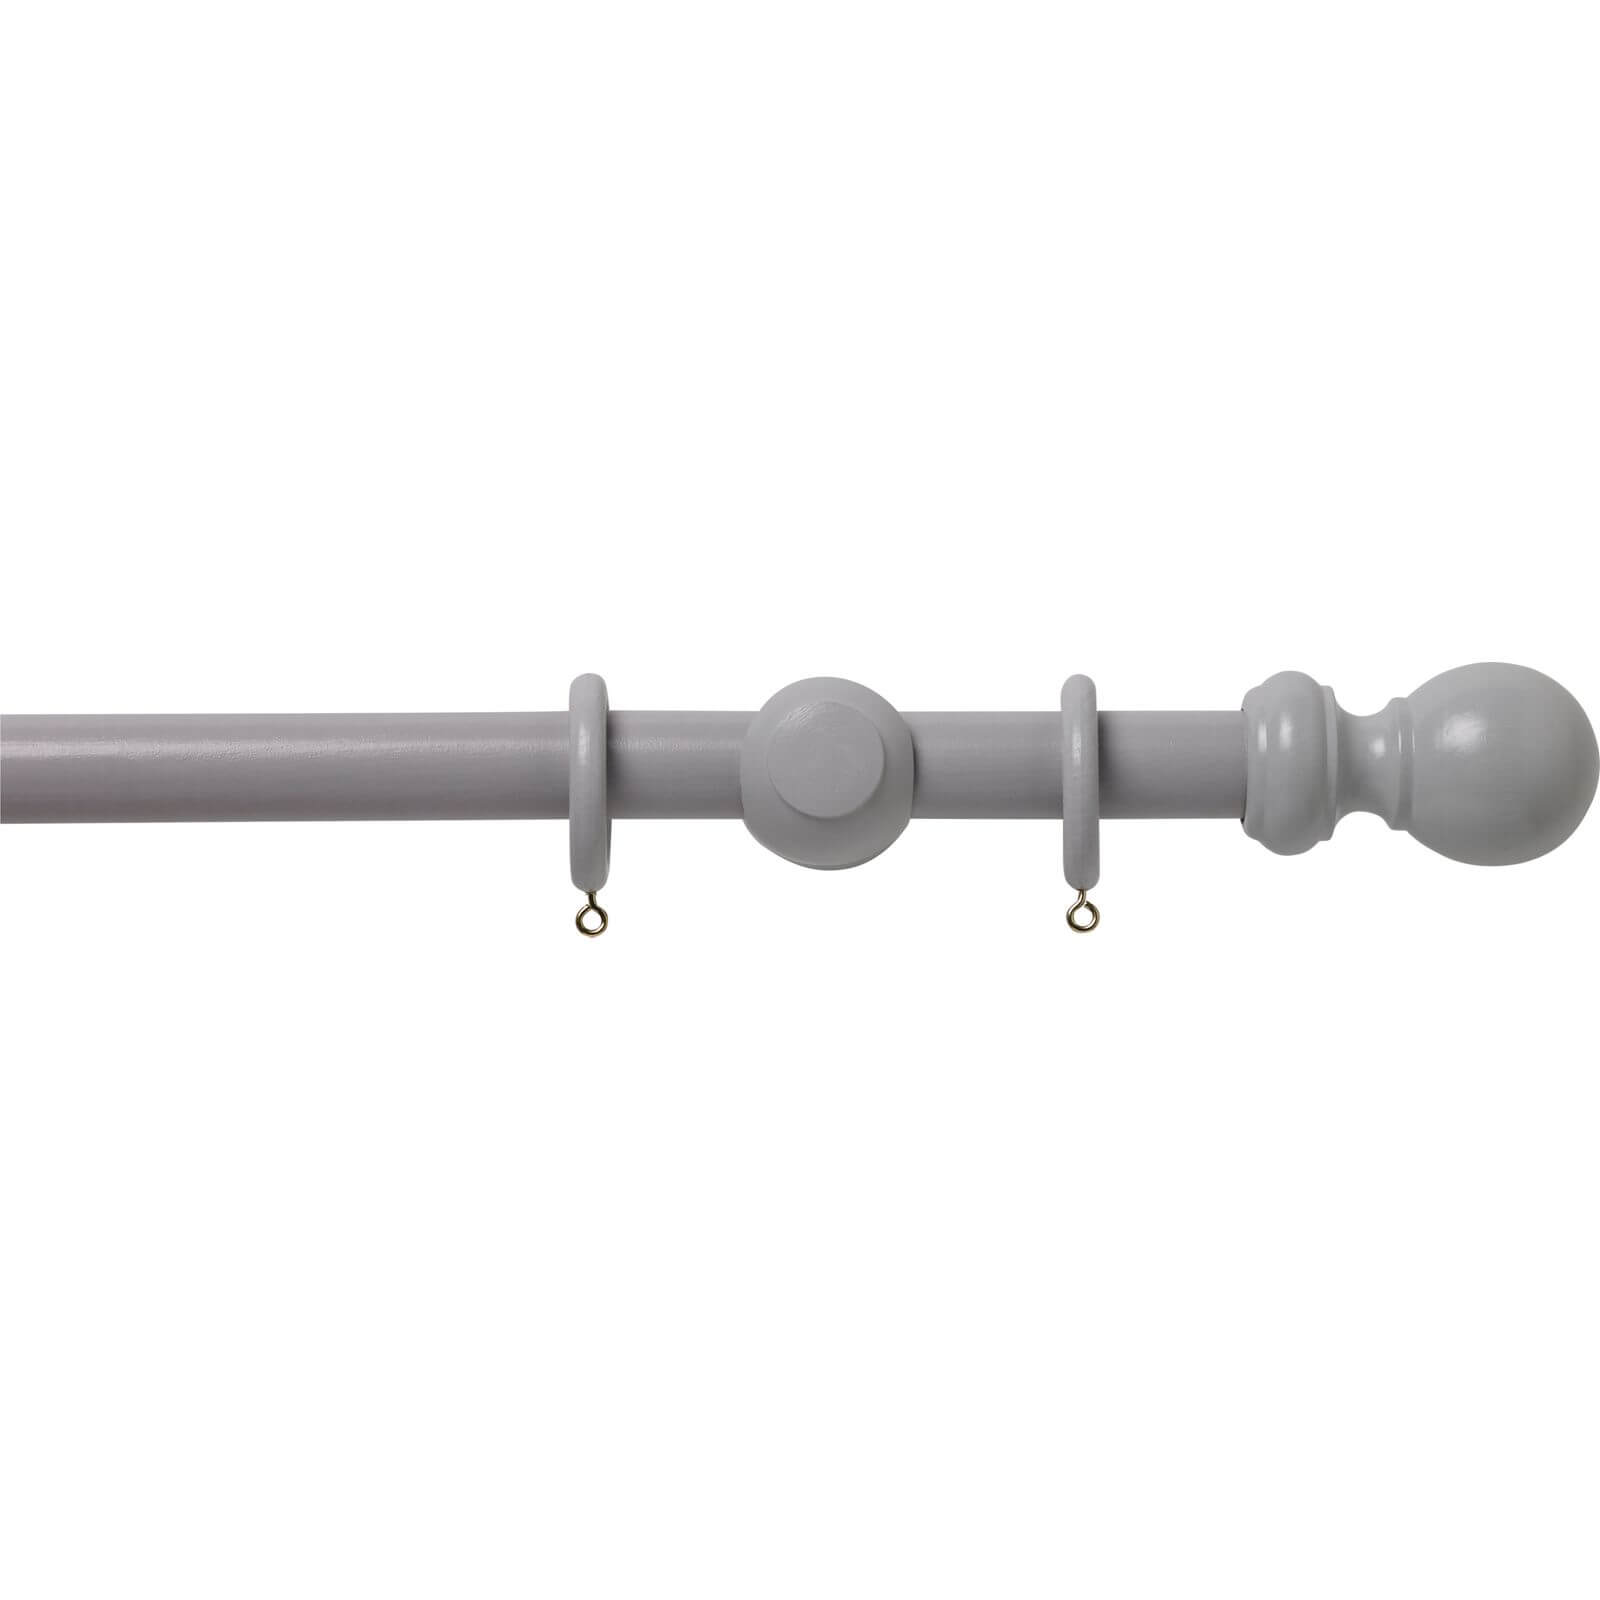 Photo of Grey Wood 28mm Curtain Pole With Ball Finials - 1.8m